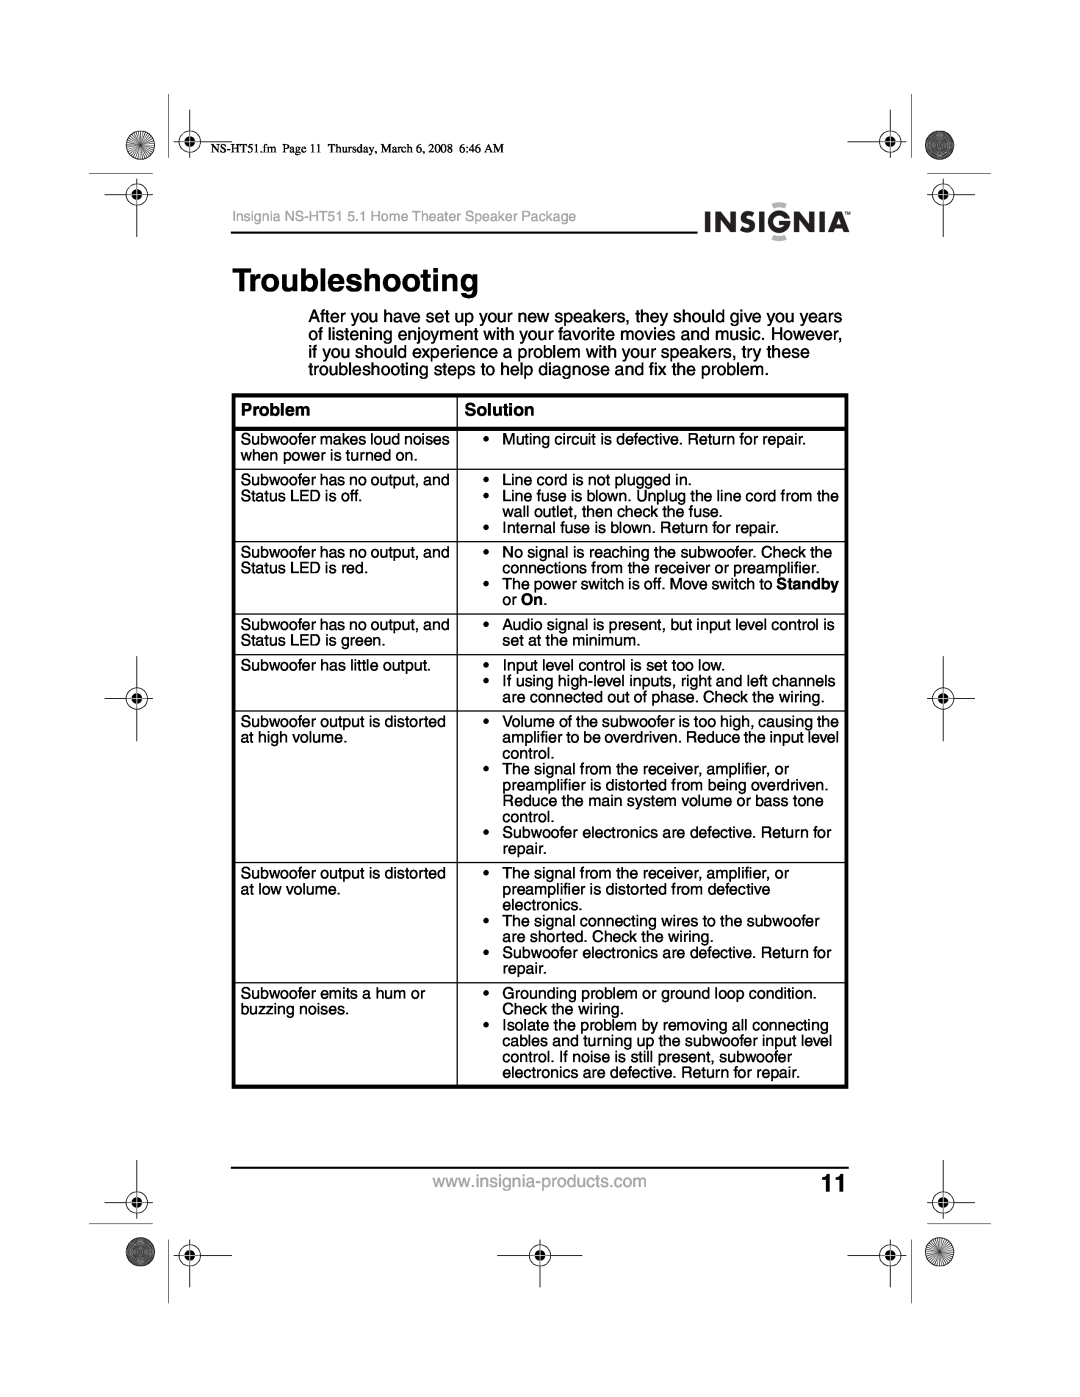 Insignia NS-HT51 manual Troubleshooting, Problem, Solution 